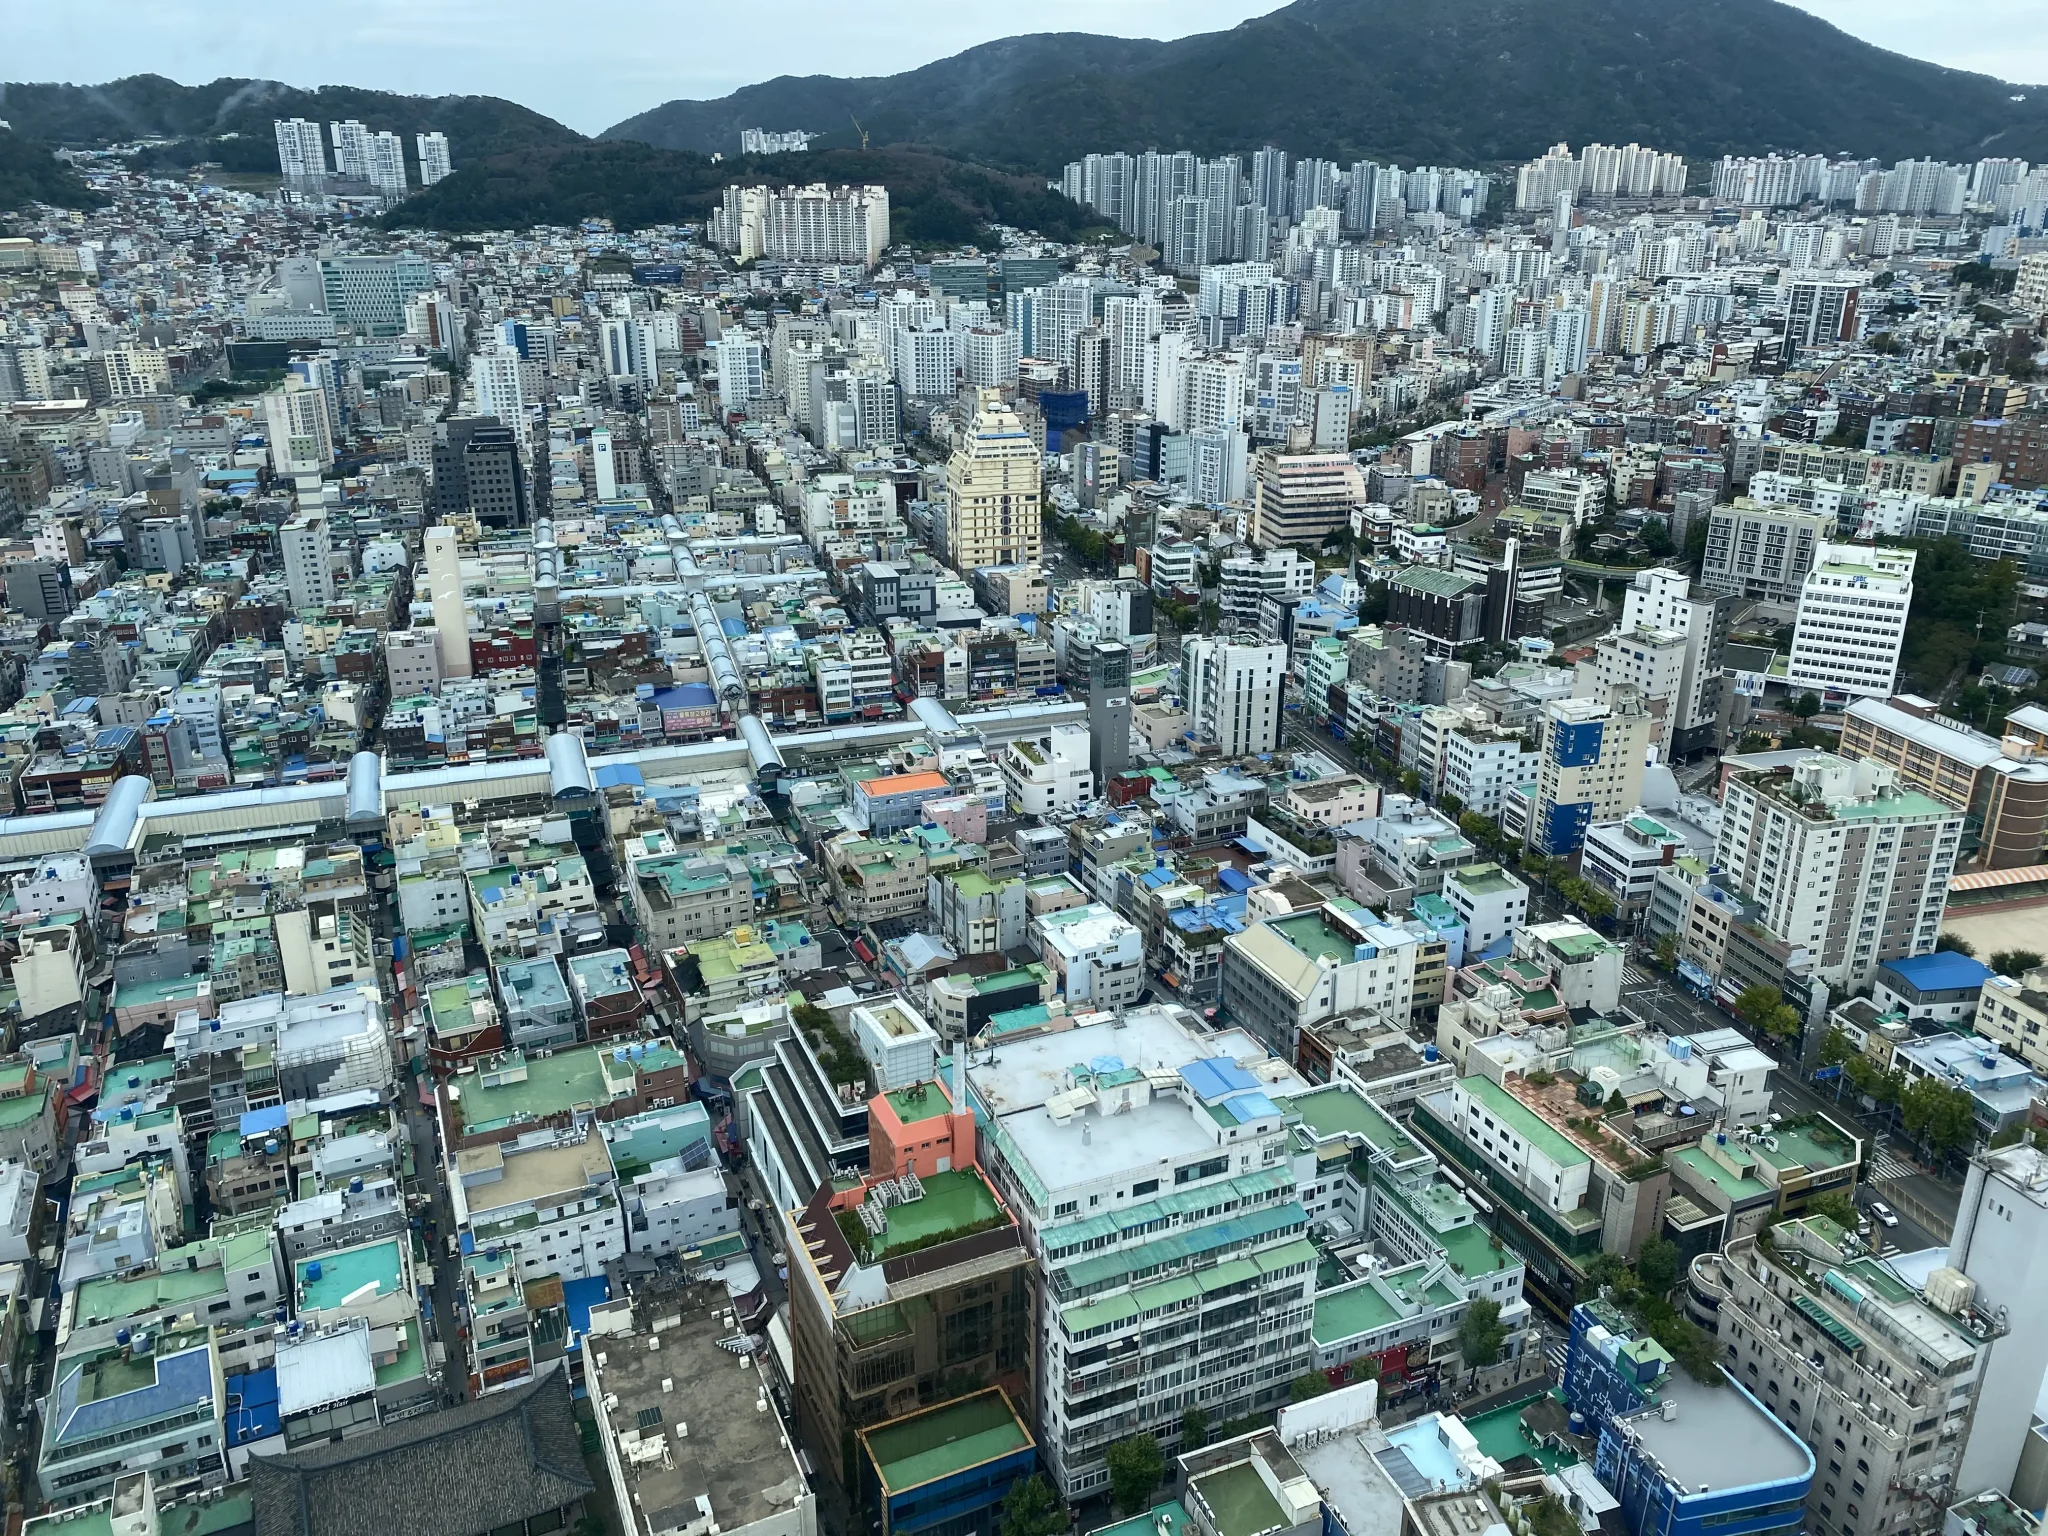 Views from Busan tower. It's a must for adding to your itinerary